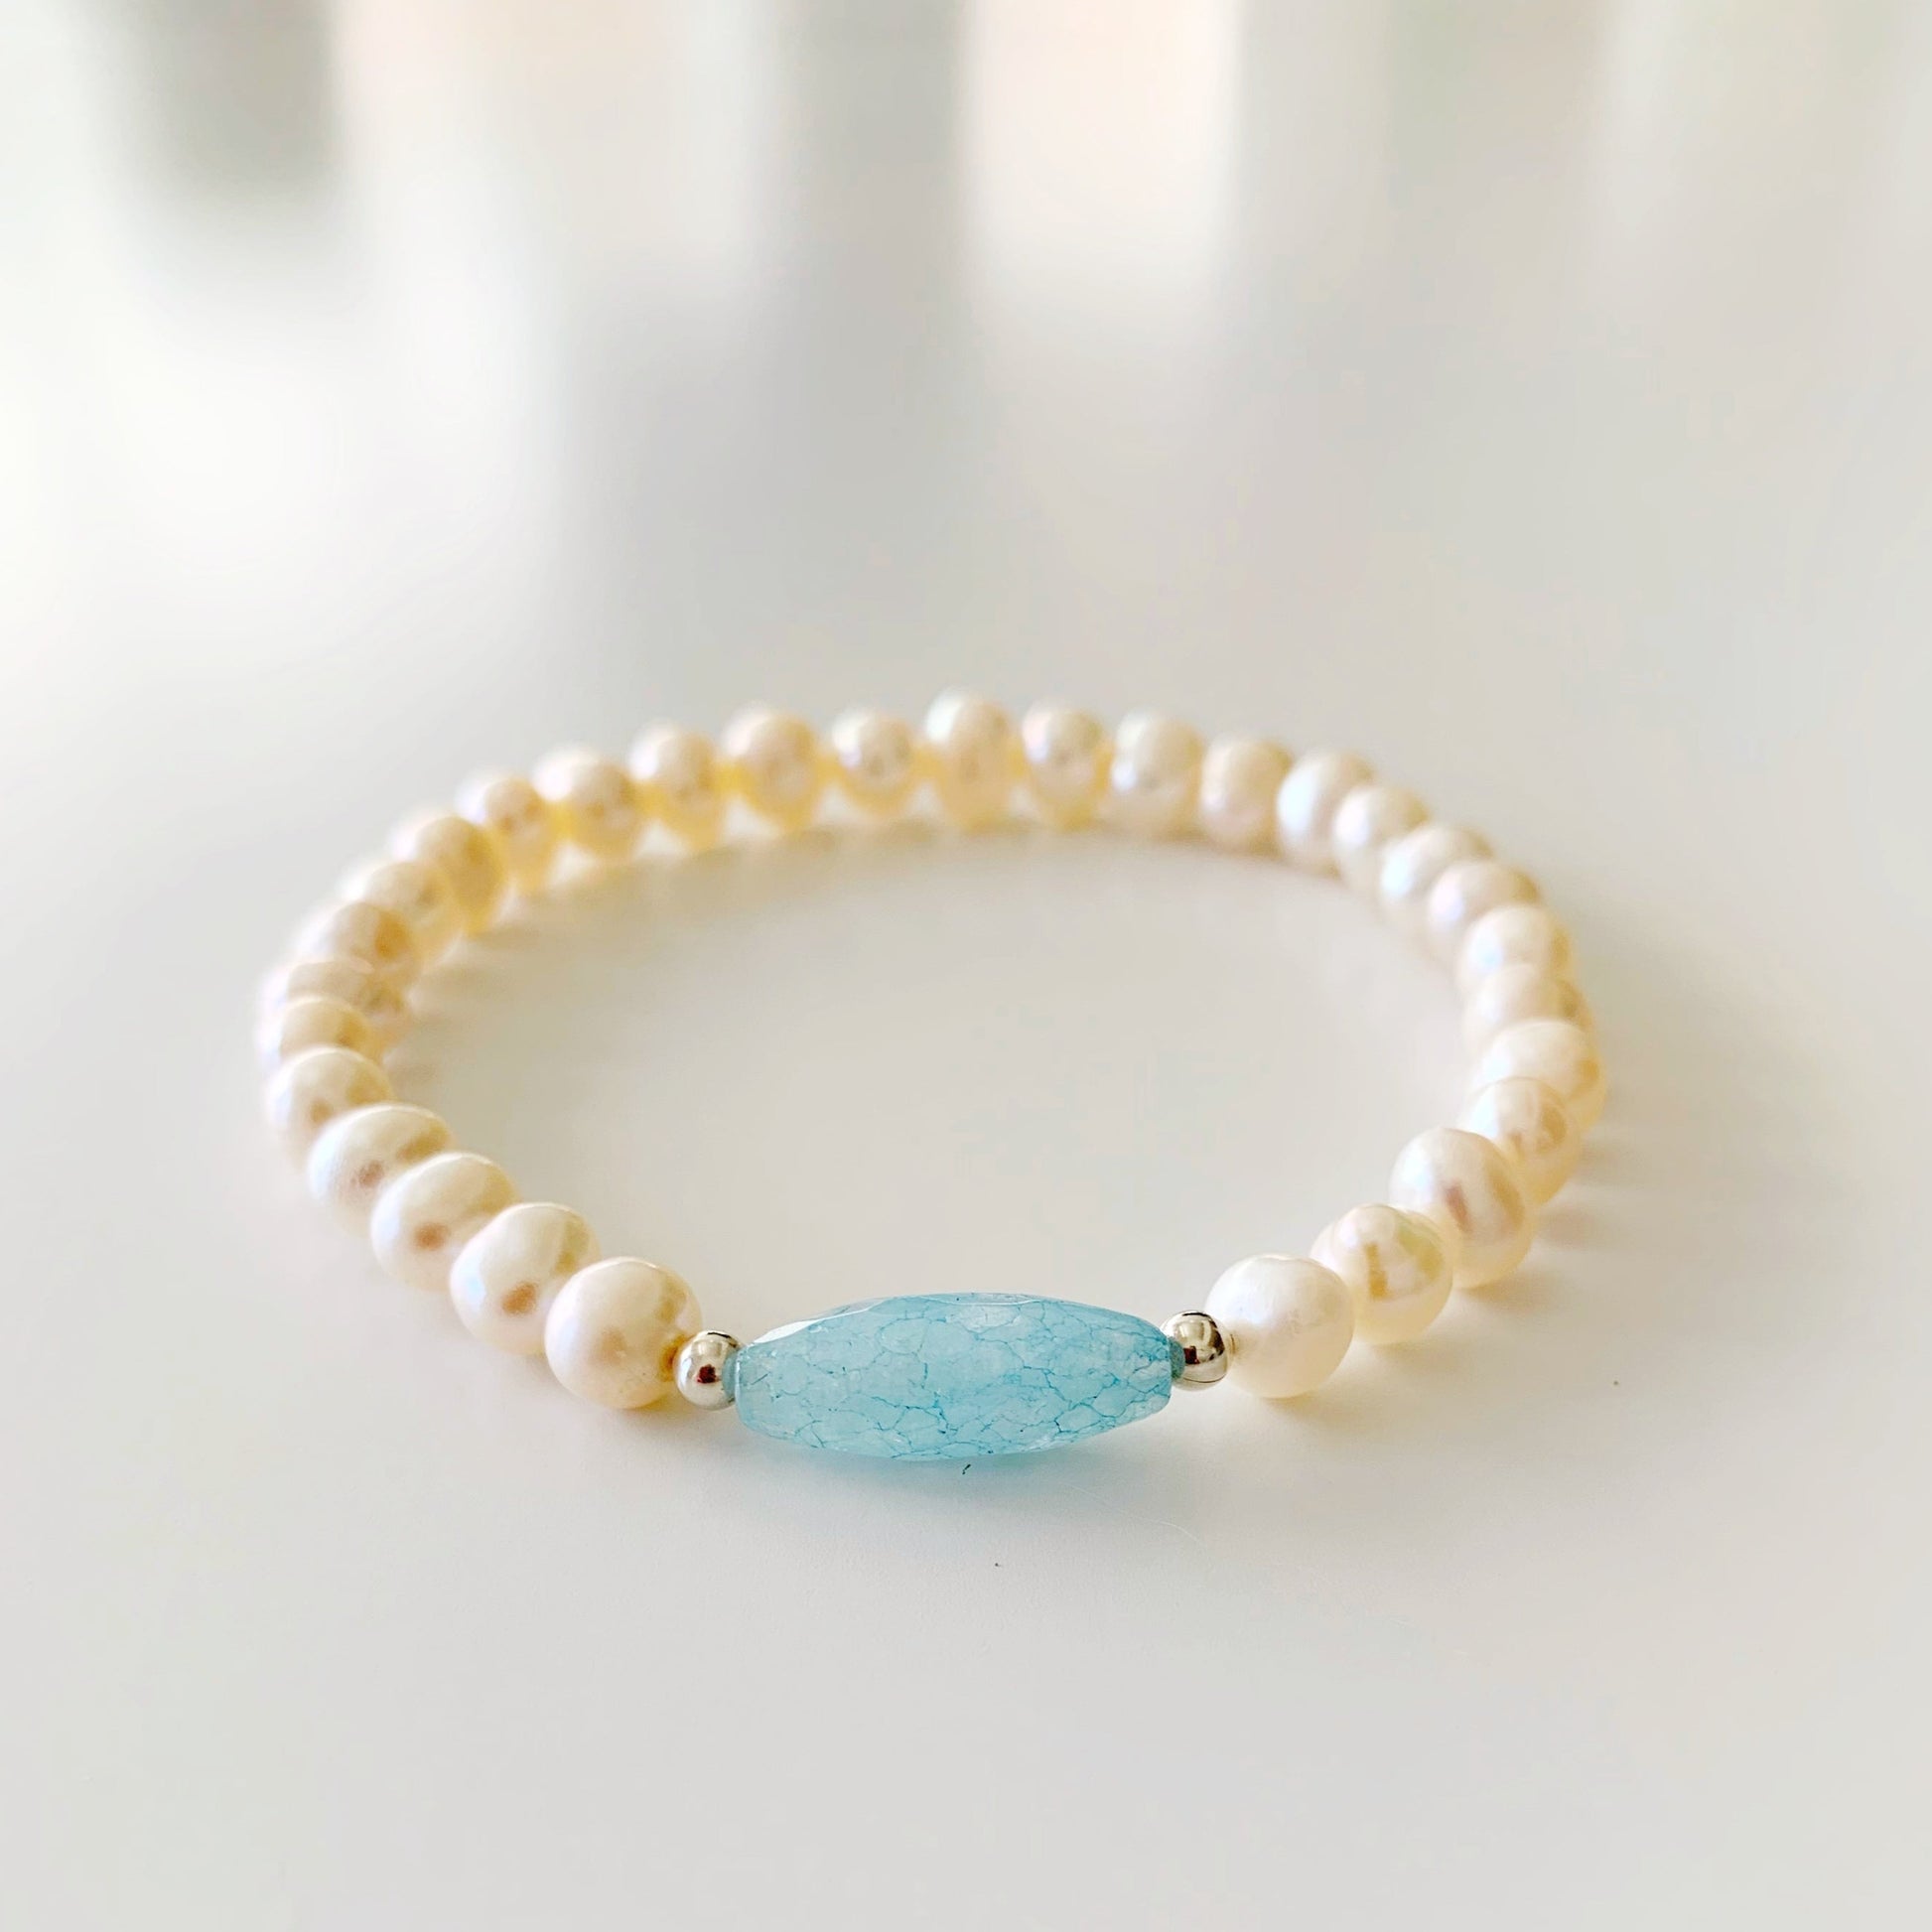 you're a gem stretch bracelet by mermaids and madeleines is designed with an aquamarine gem in the center with sterling silver beads and freshwater pearls. this bracelet is photographed on a white surface